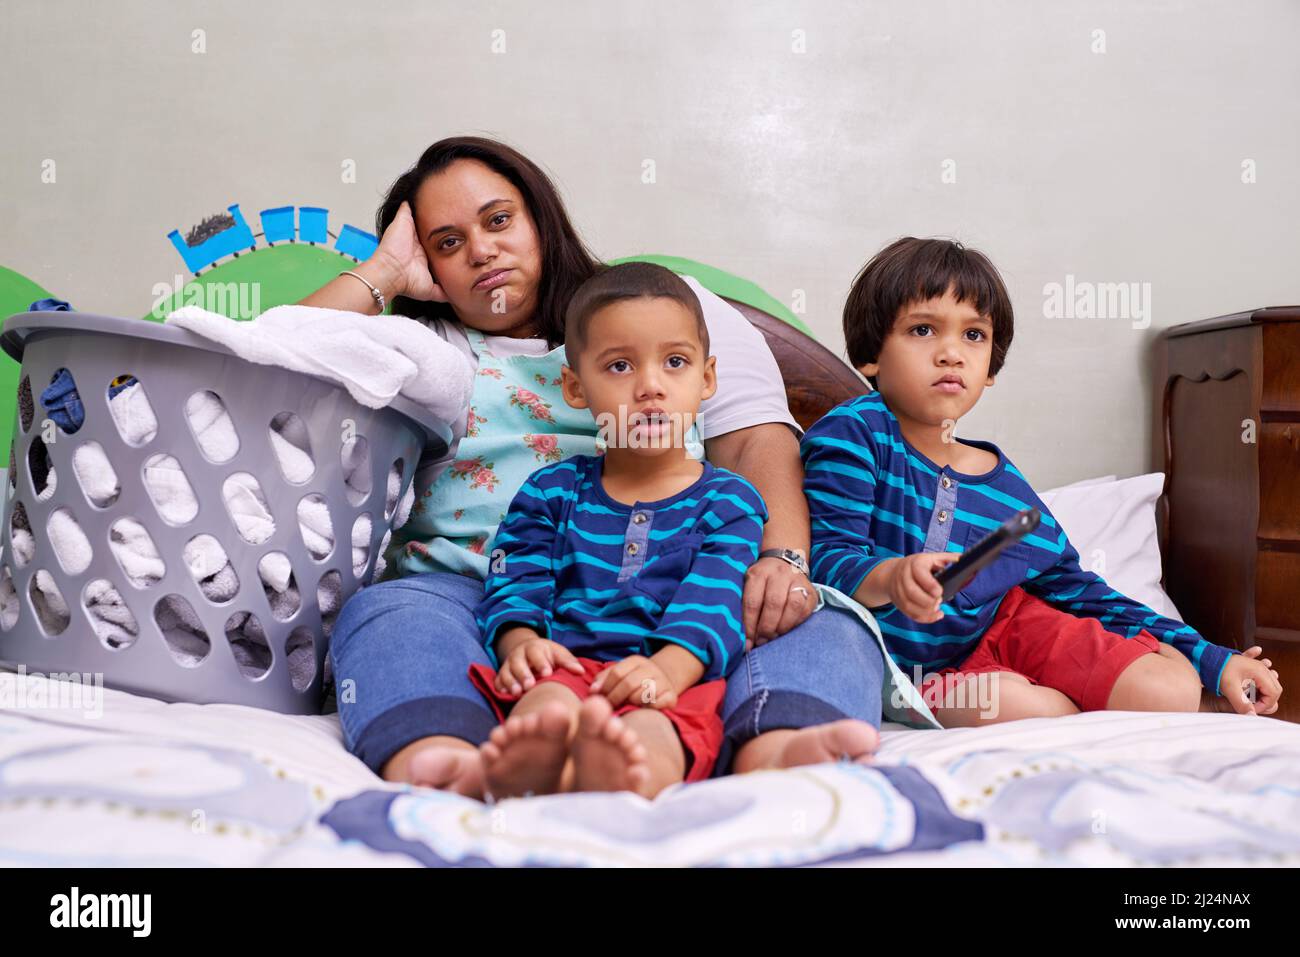 Theyre all just chilling out for a bit. Portrait of a mother sitting on a bed with her two sons. Stock Photo